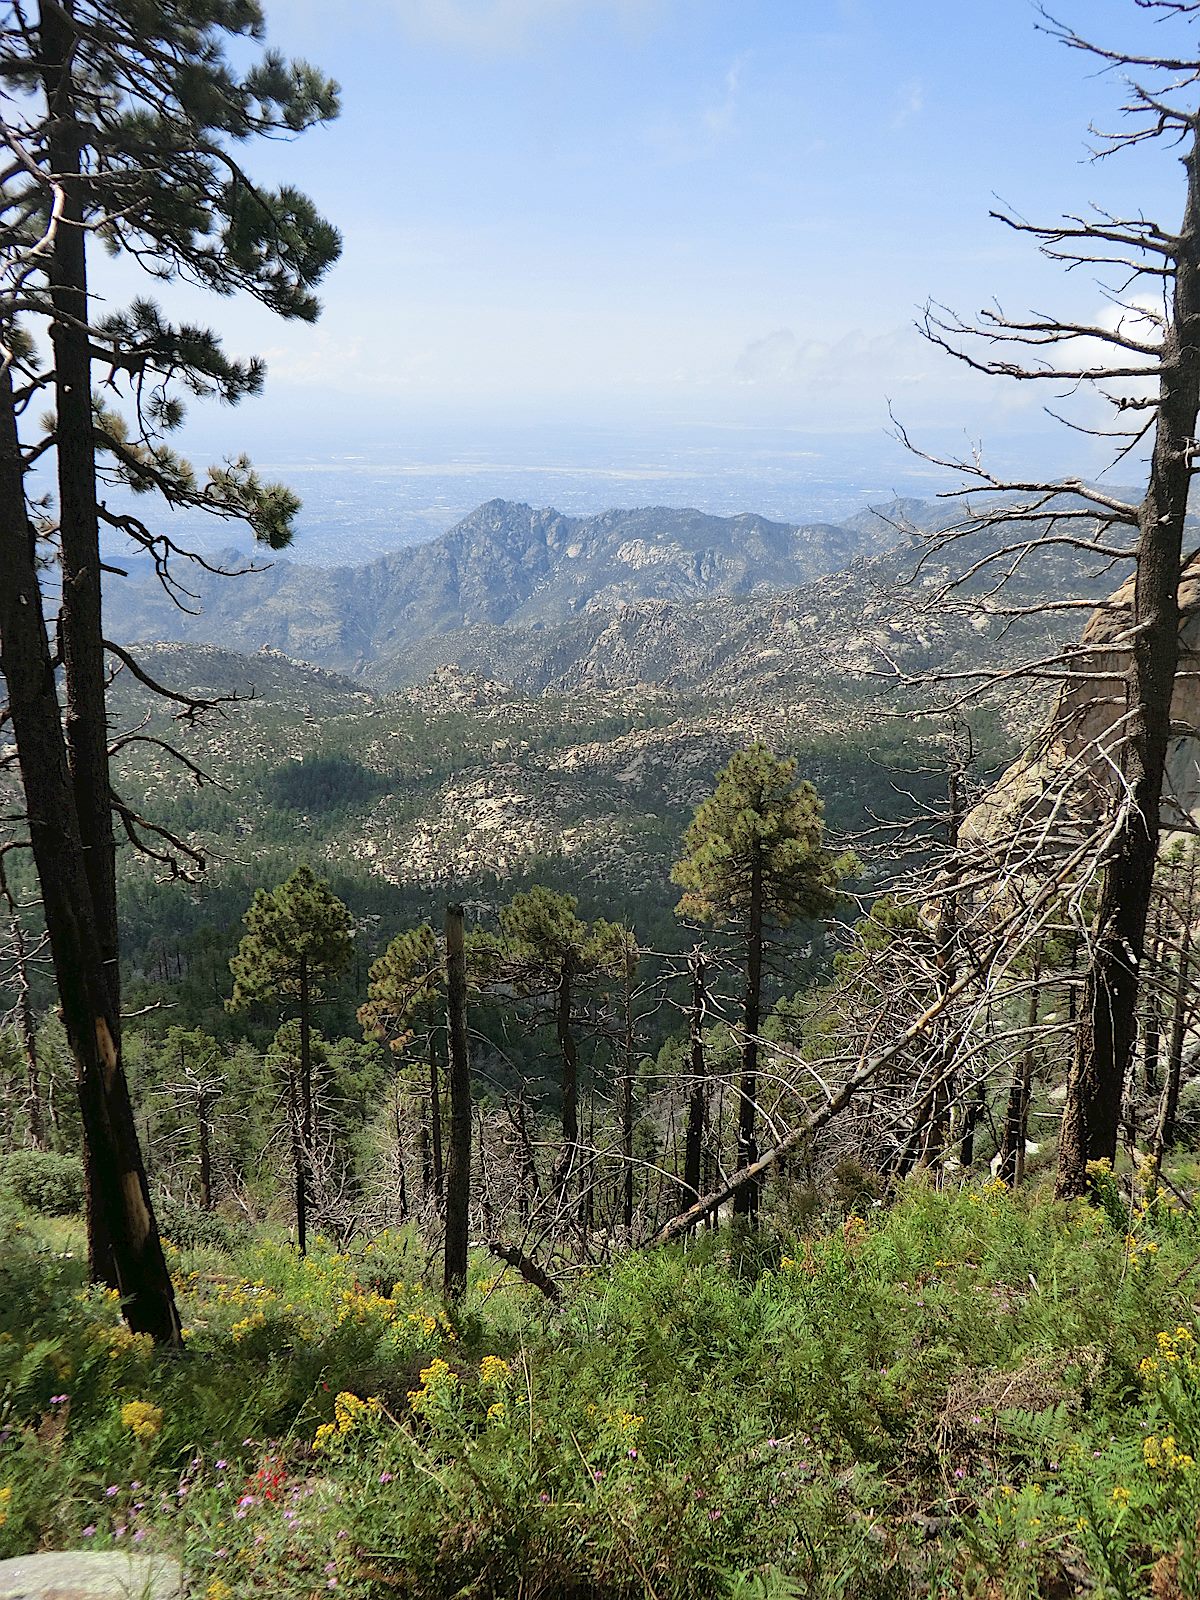 A view from the Lemmon Rock Trail. August 2012.